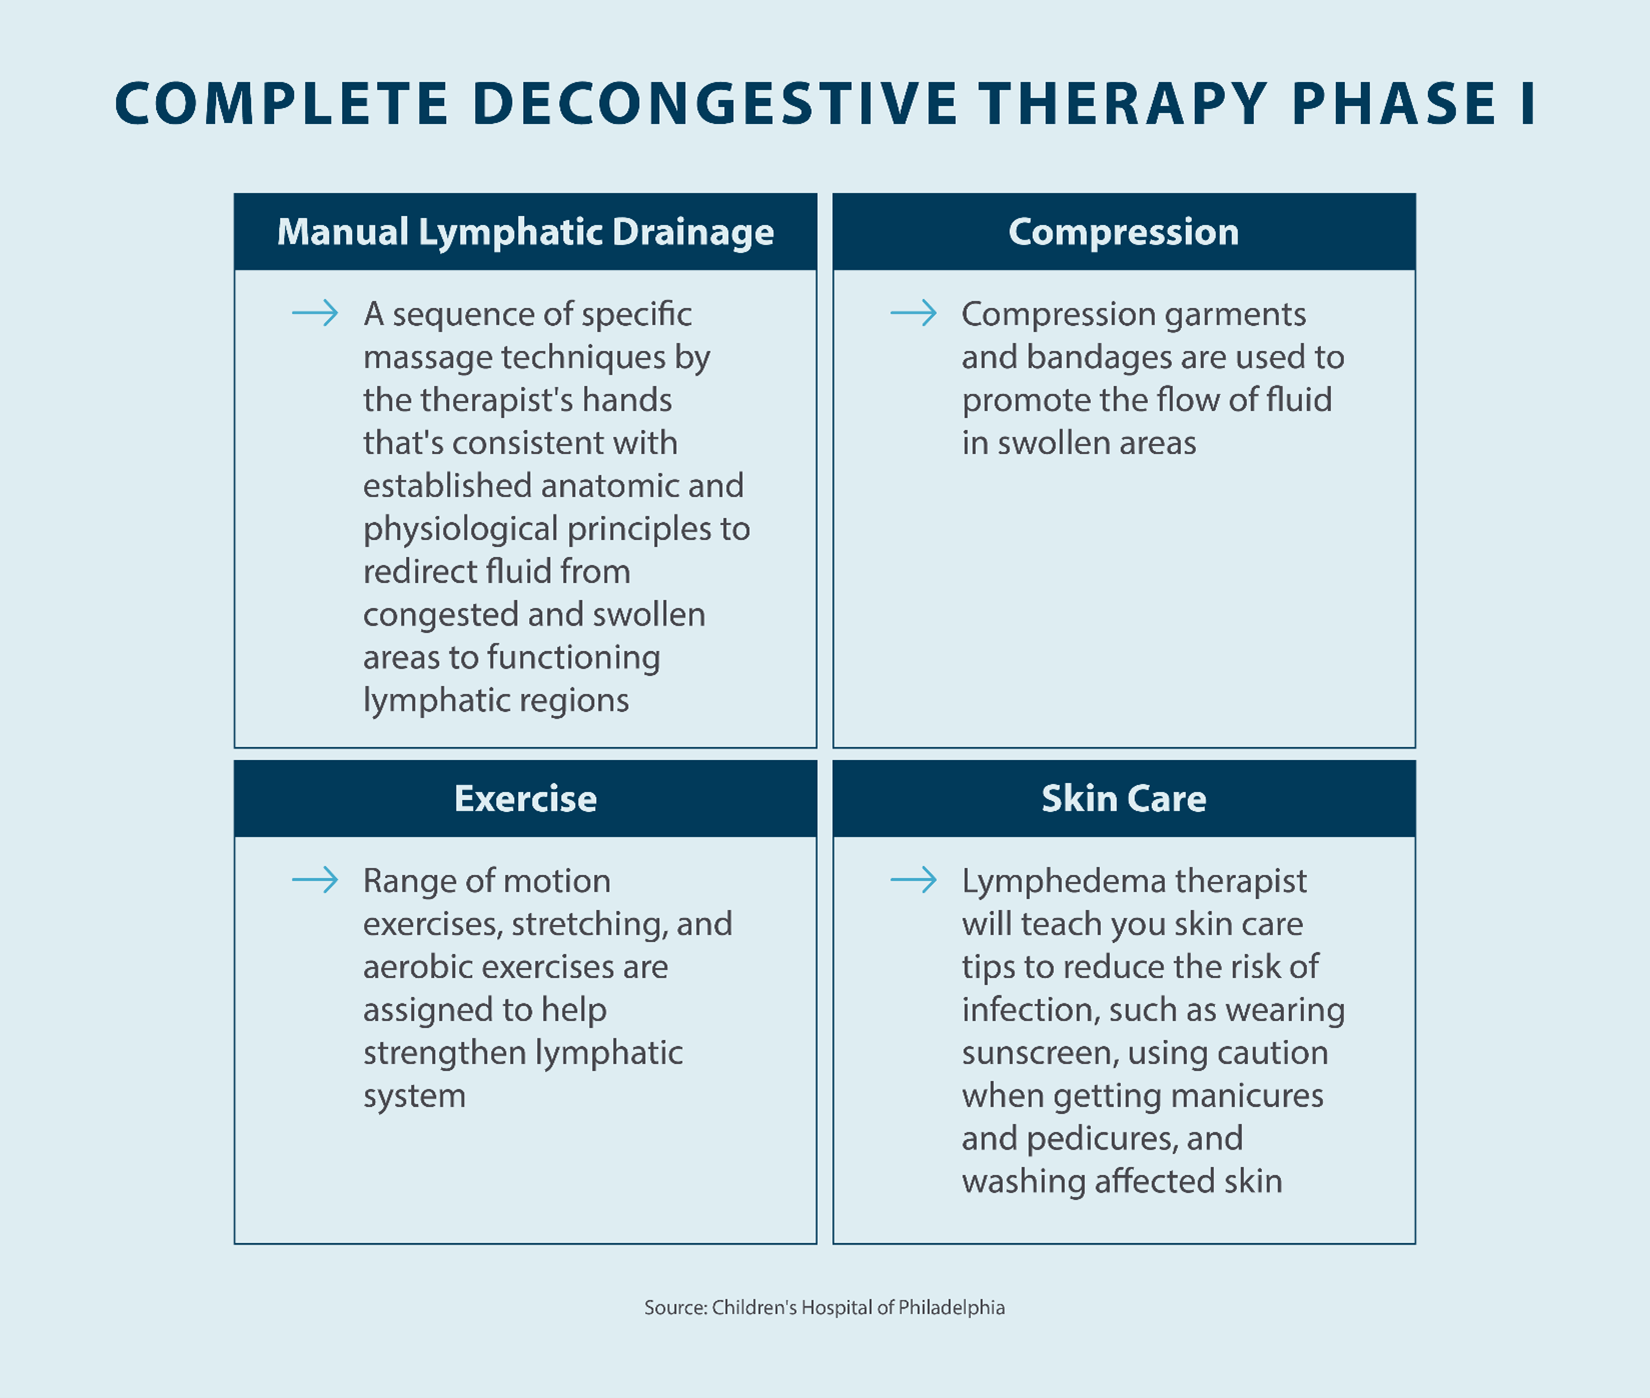 Complete decongestive therapy phase I